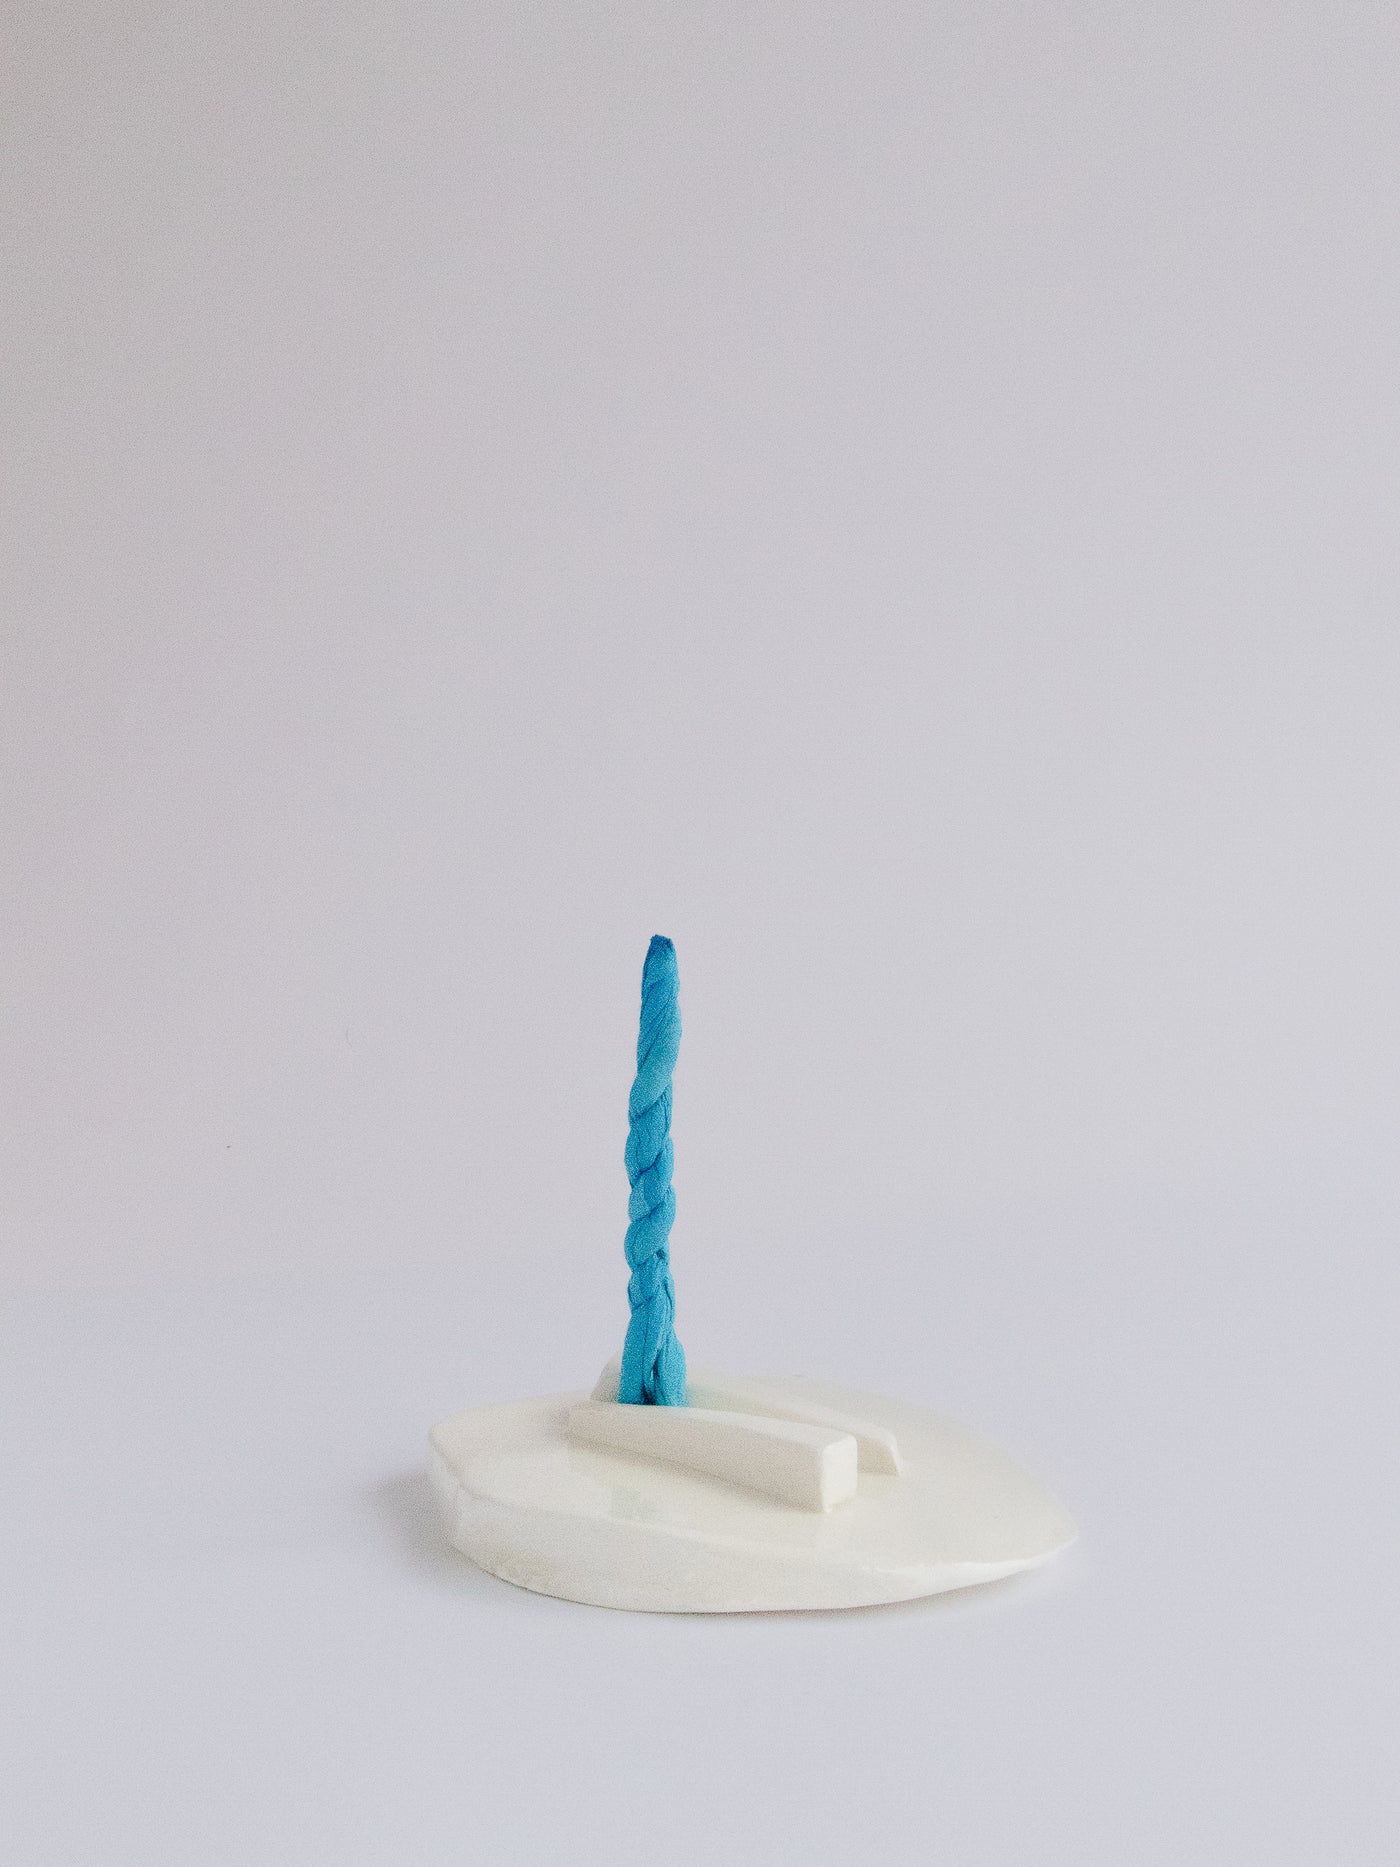 Glossy White Rope Incense Holder hand formed by L.A. Ceramic Artist Sarah Vandersall of Plooi Displays.